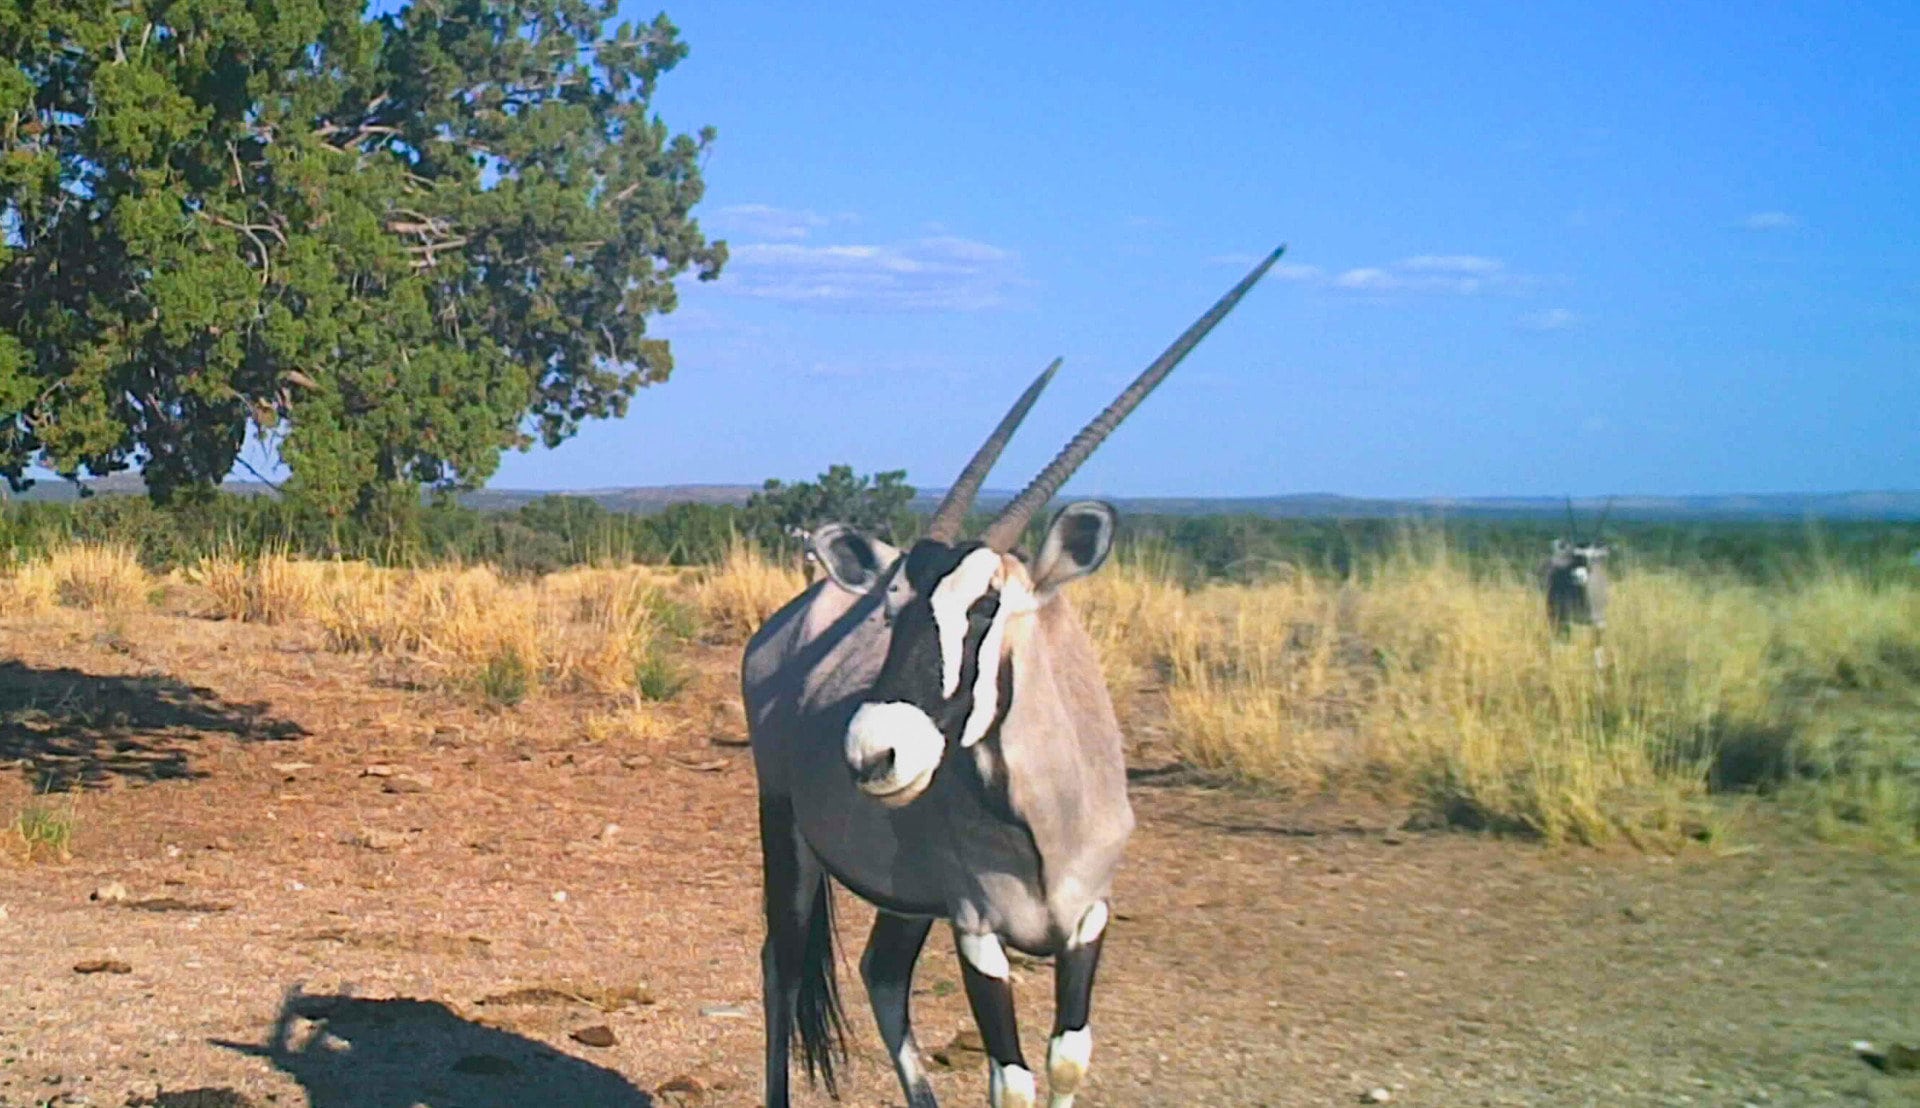 Oryx game camera pic new mexico uncle bill's farm & ranch